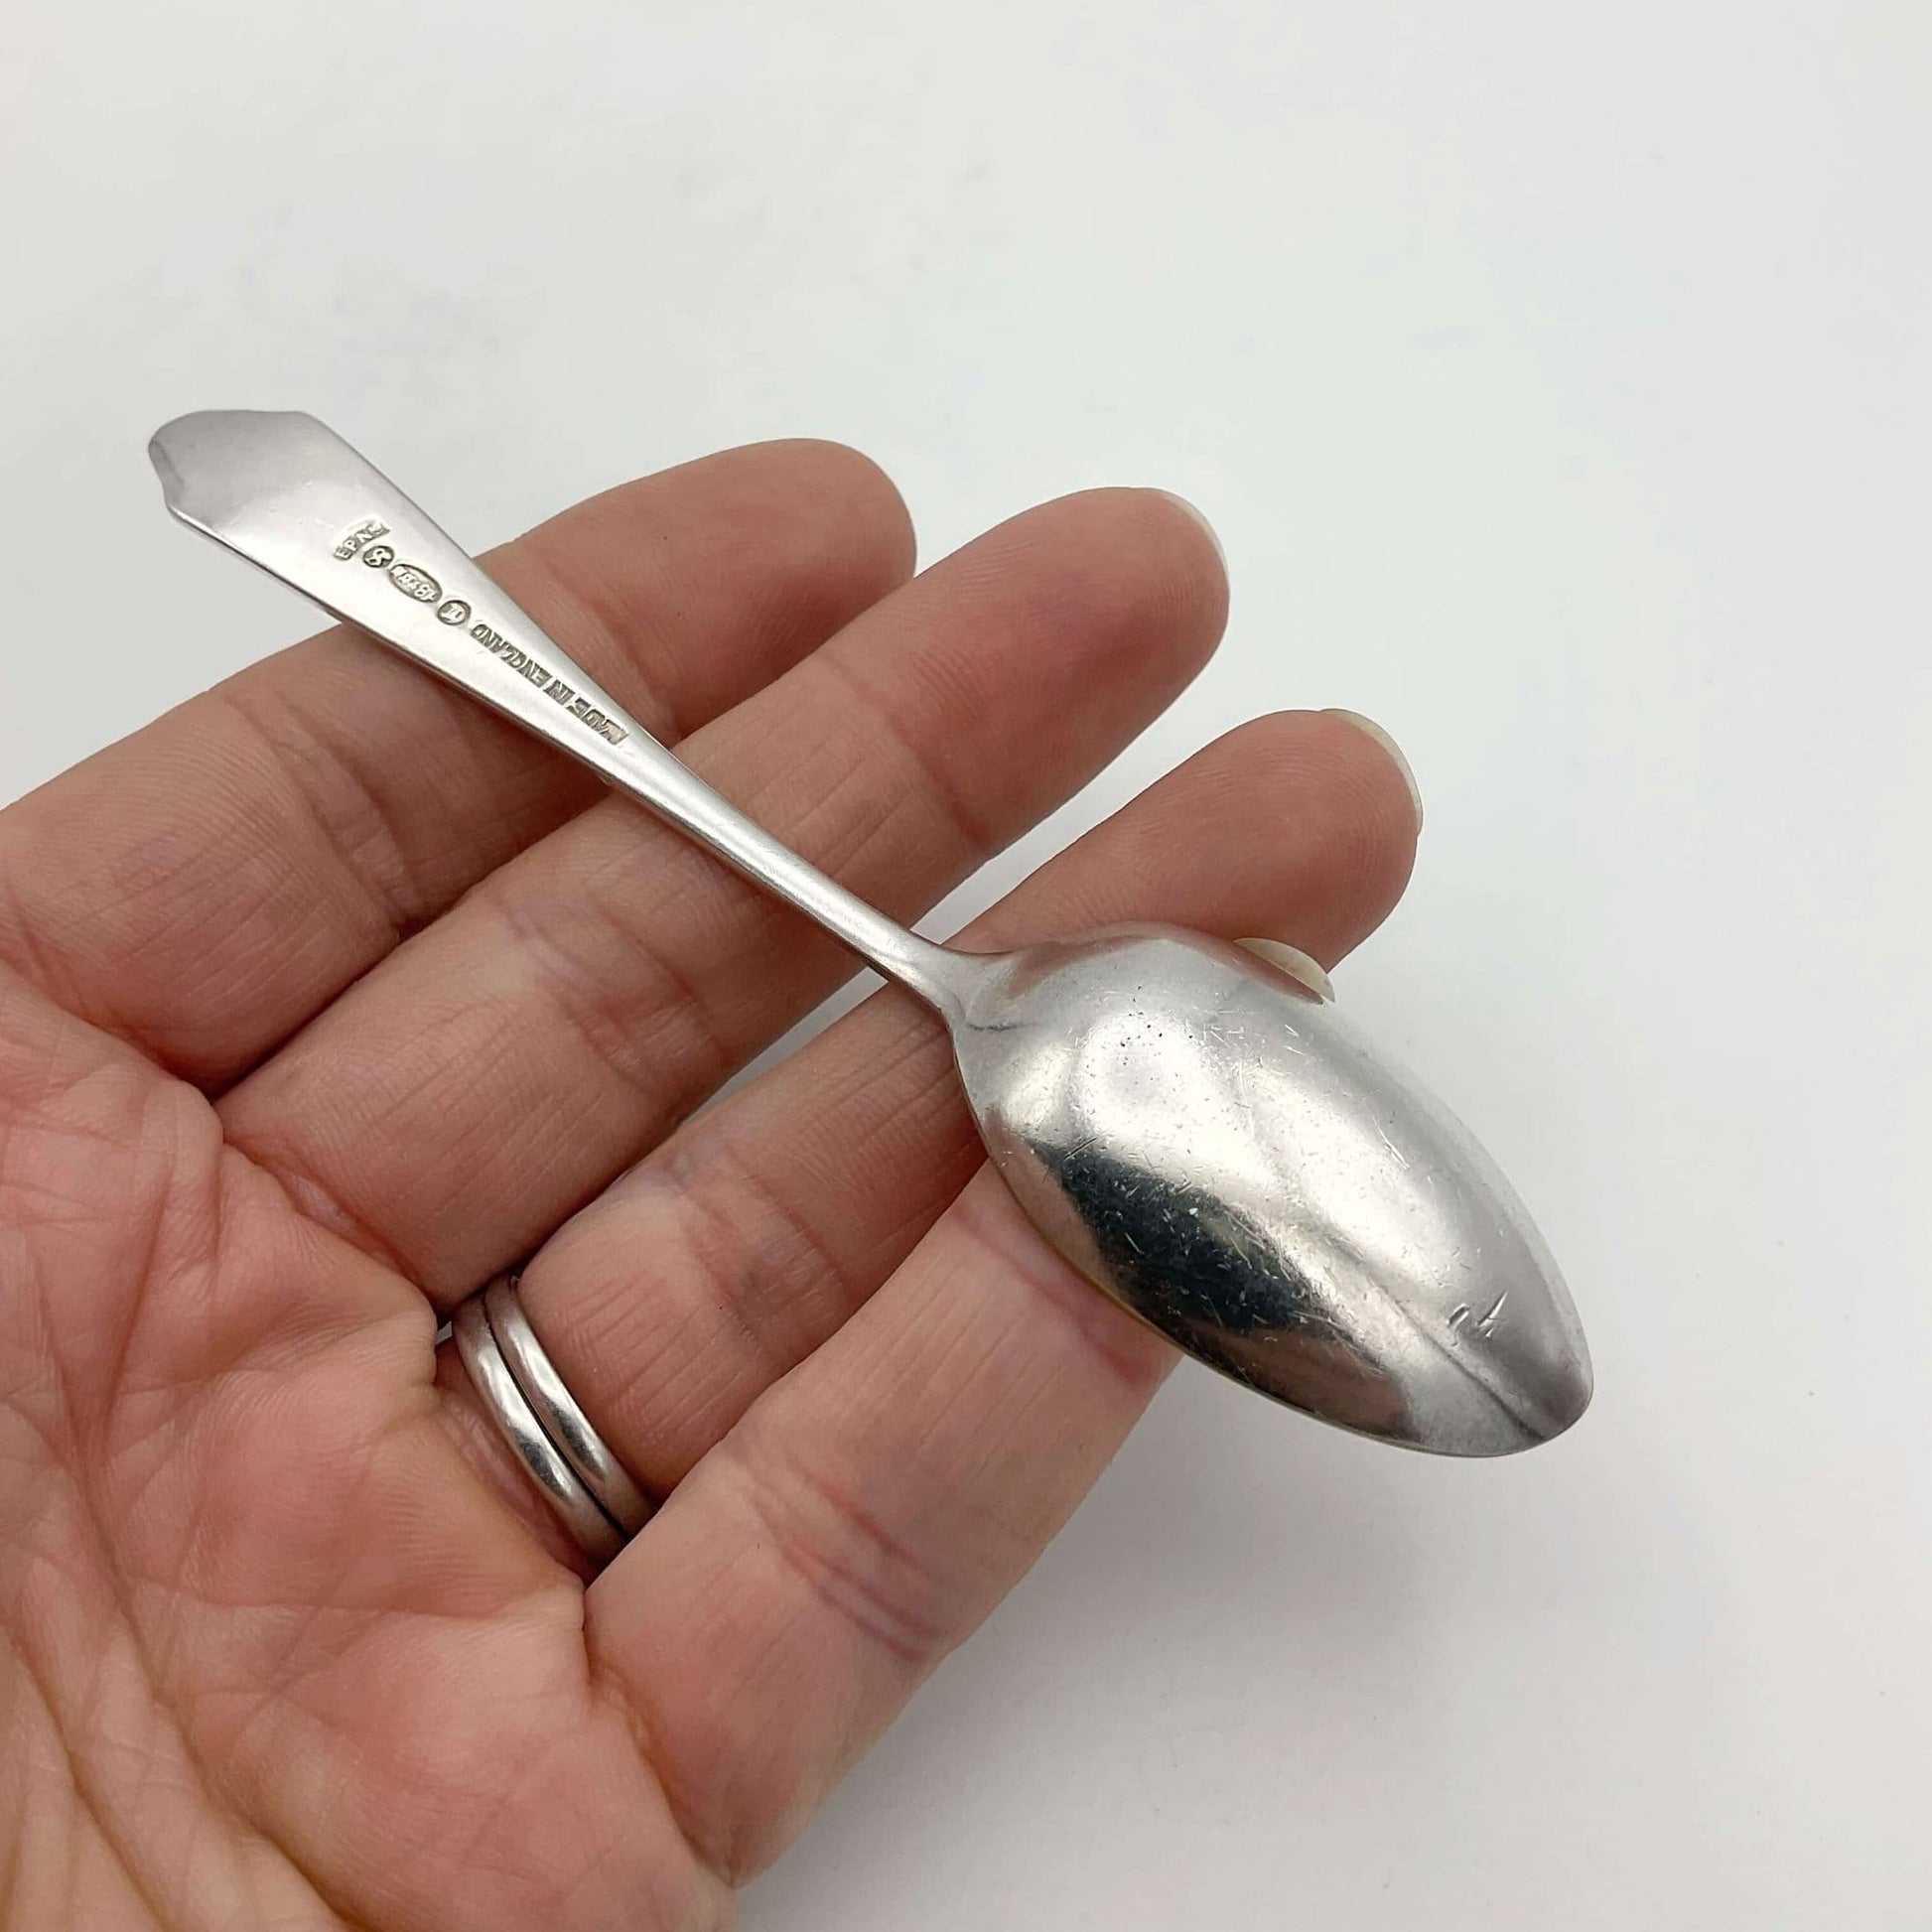 Back of coffee spoon held in a hand